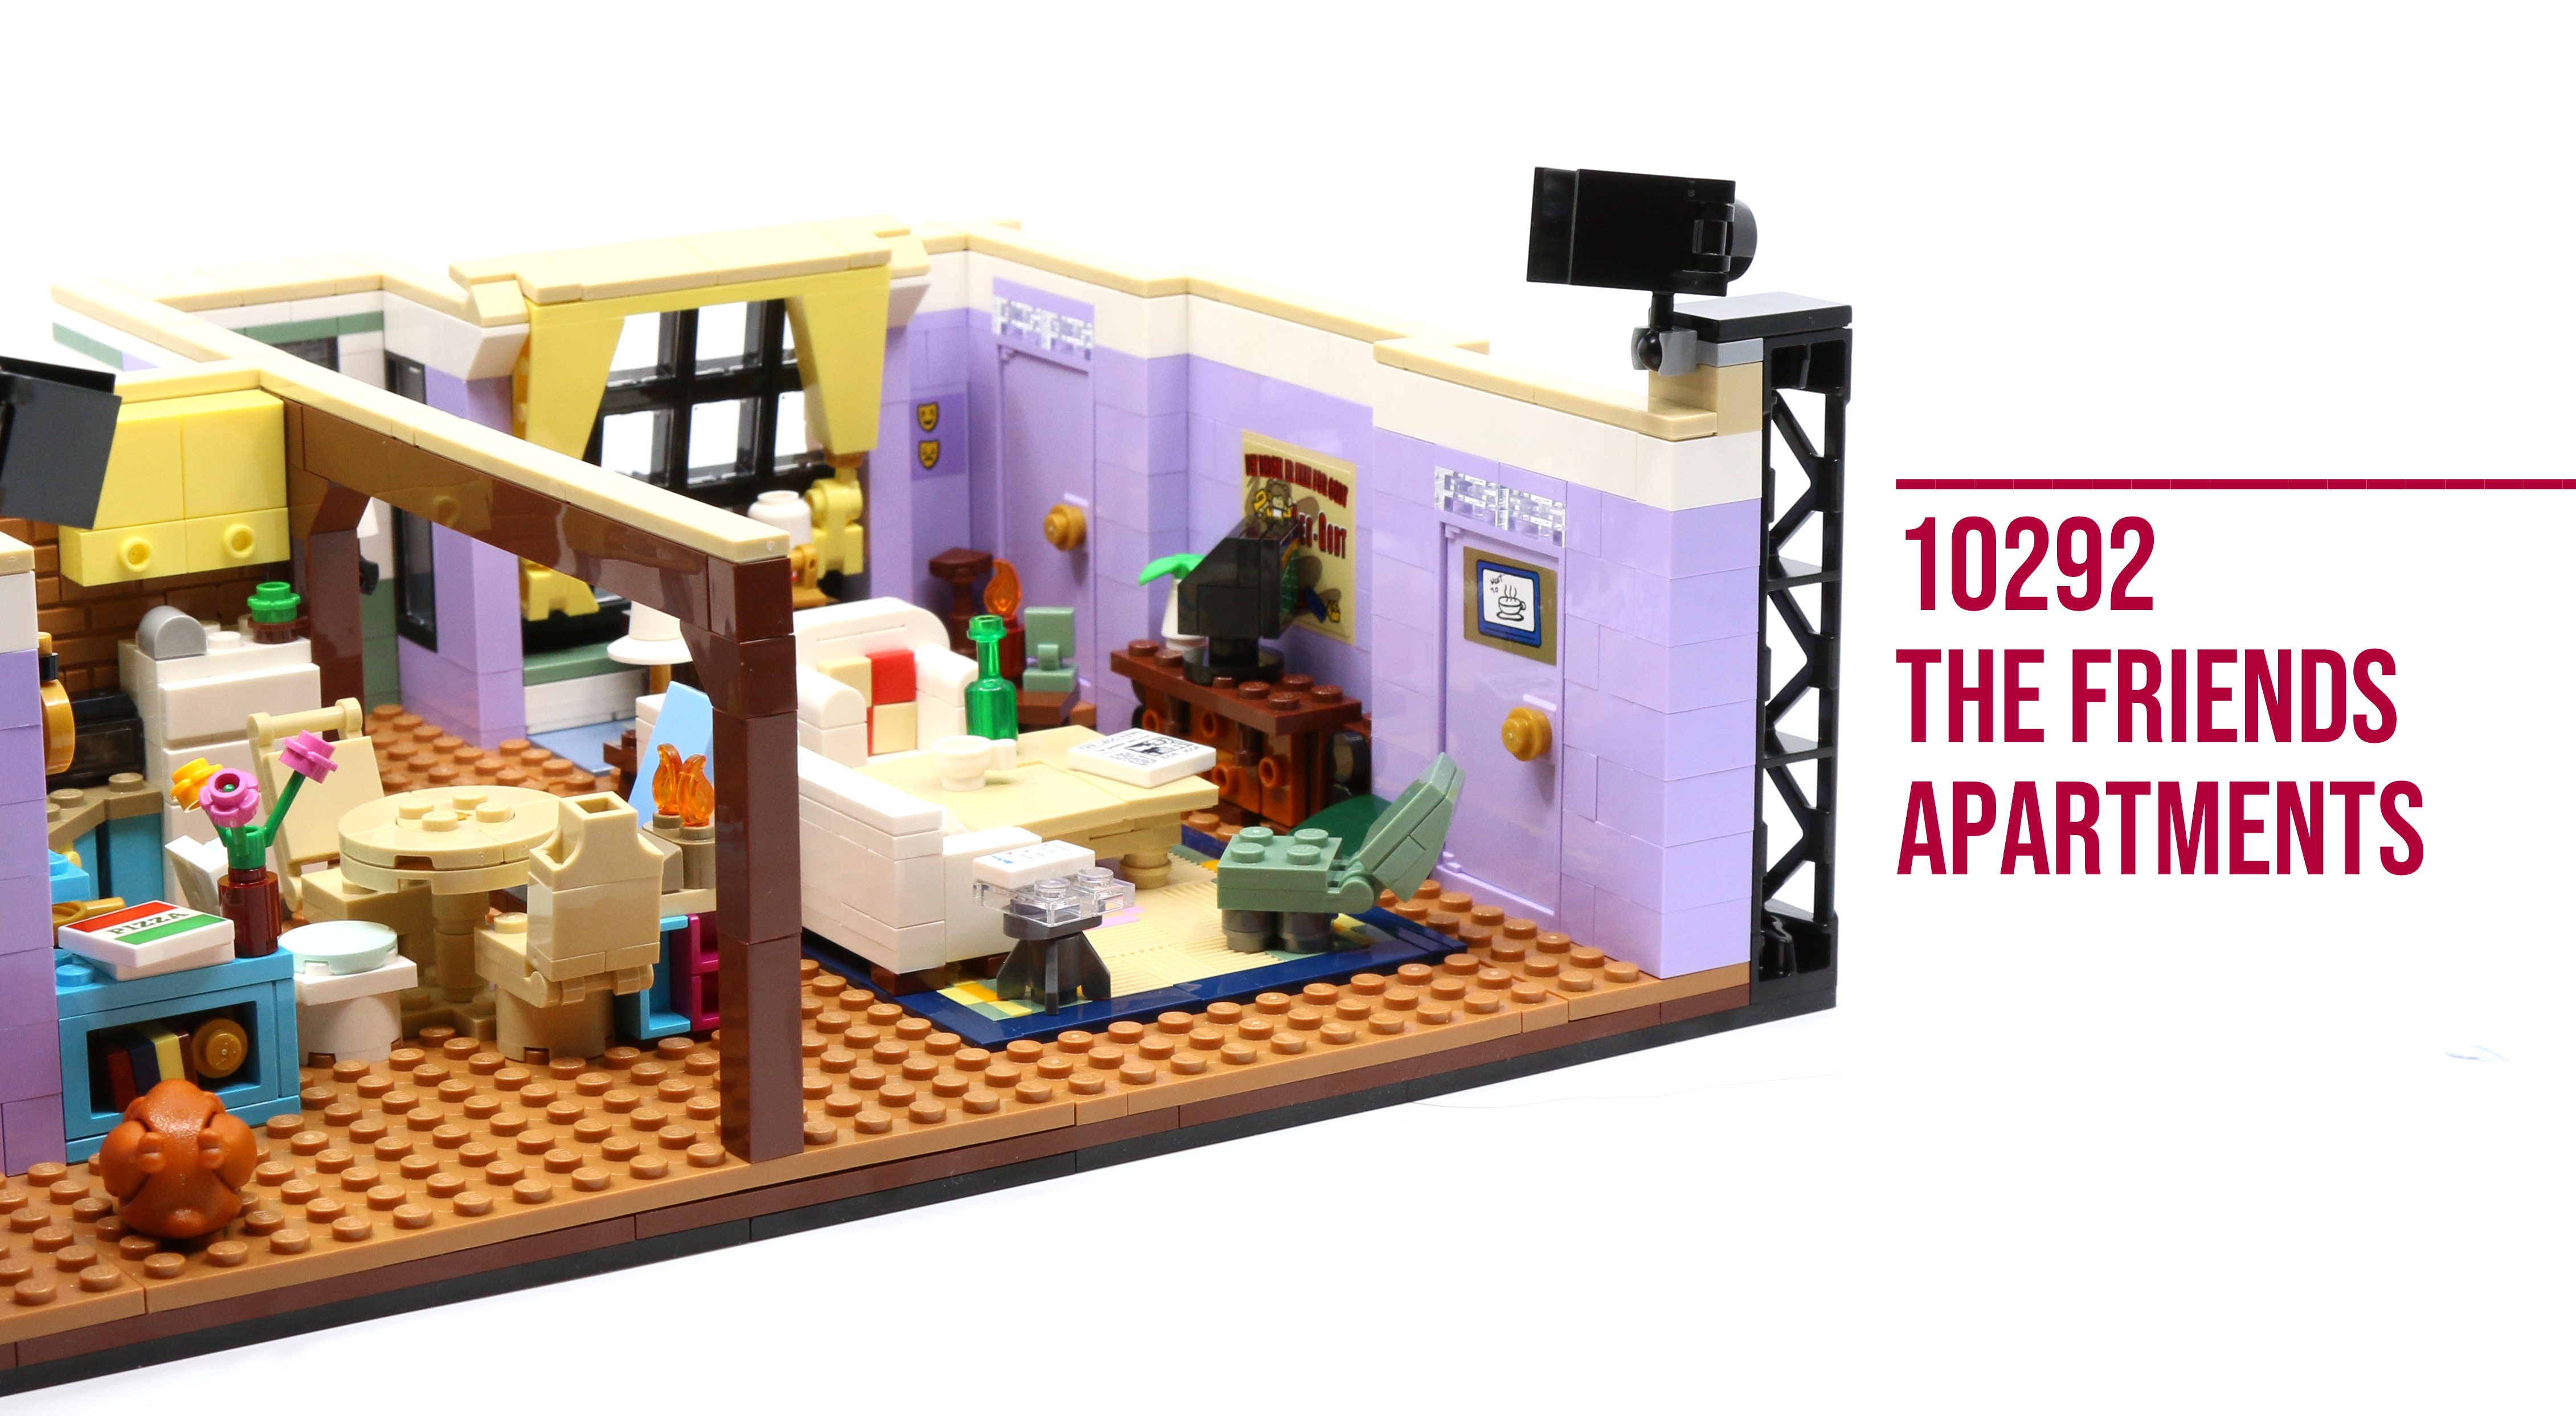 Review: LEGO 10292 The Apartments (2021) - Jay's Brick Blog